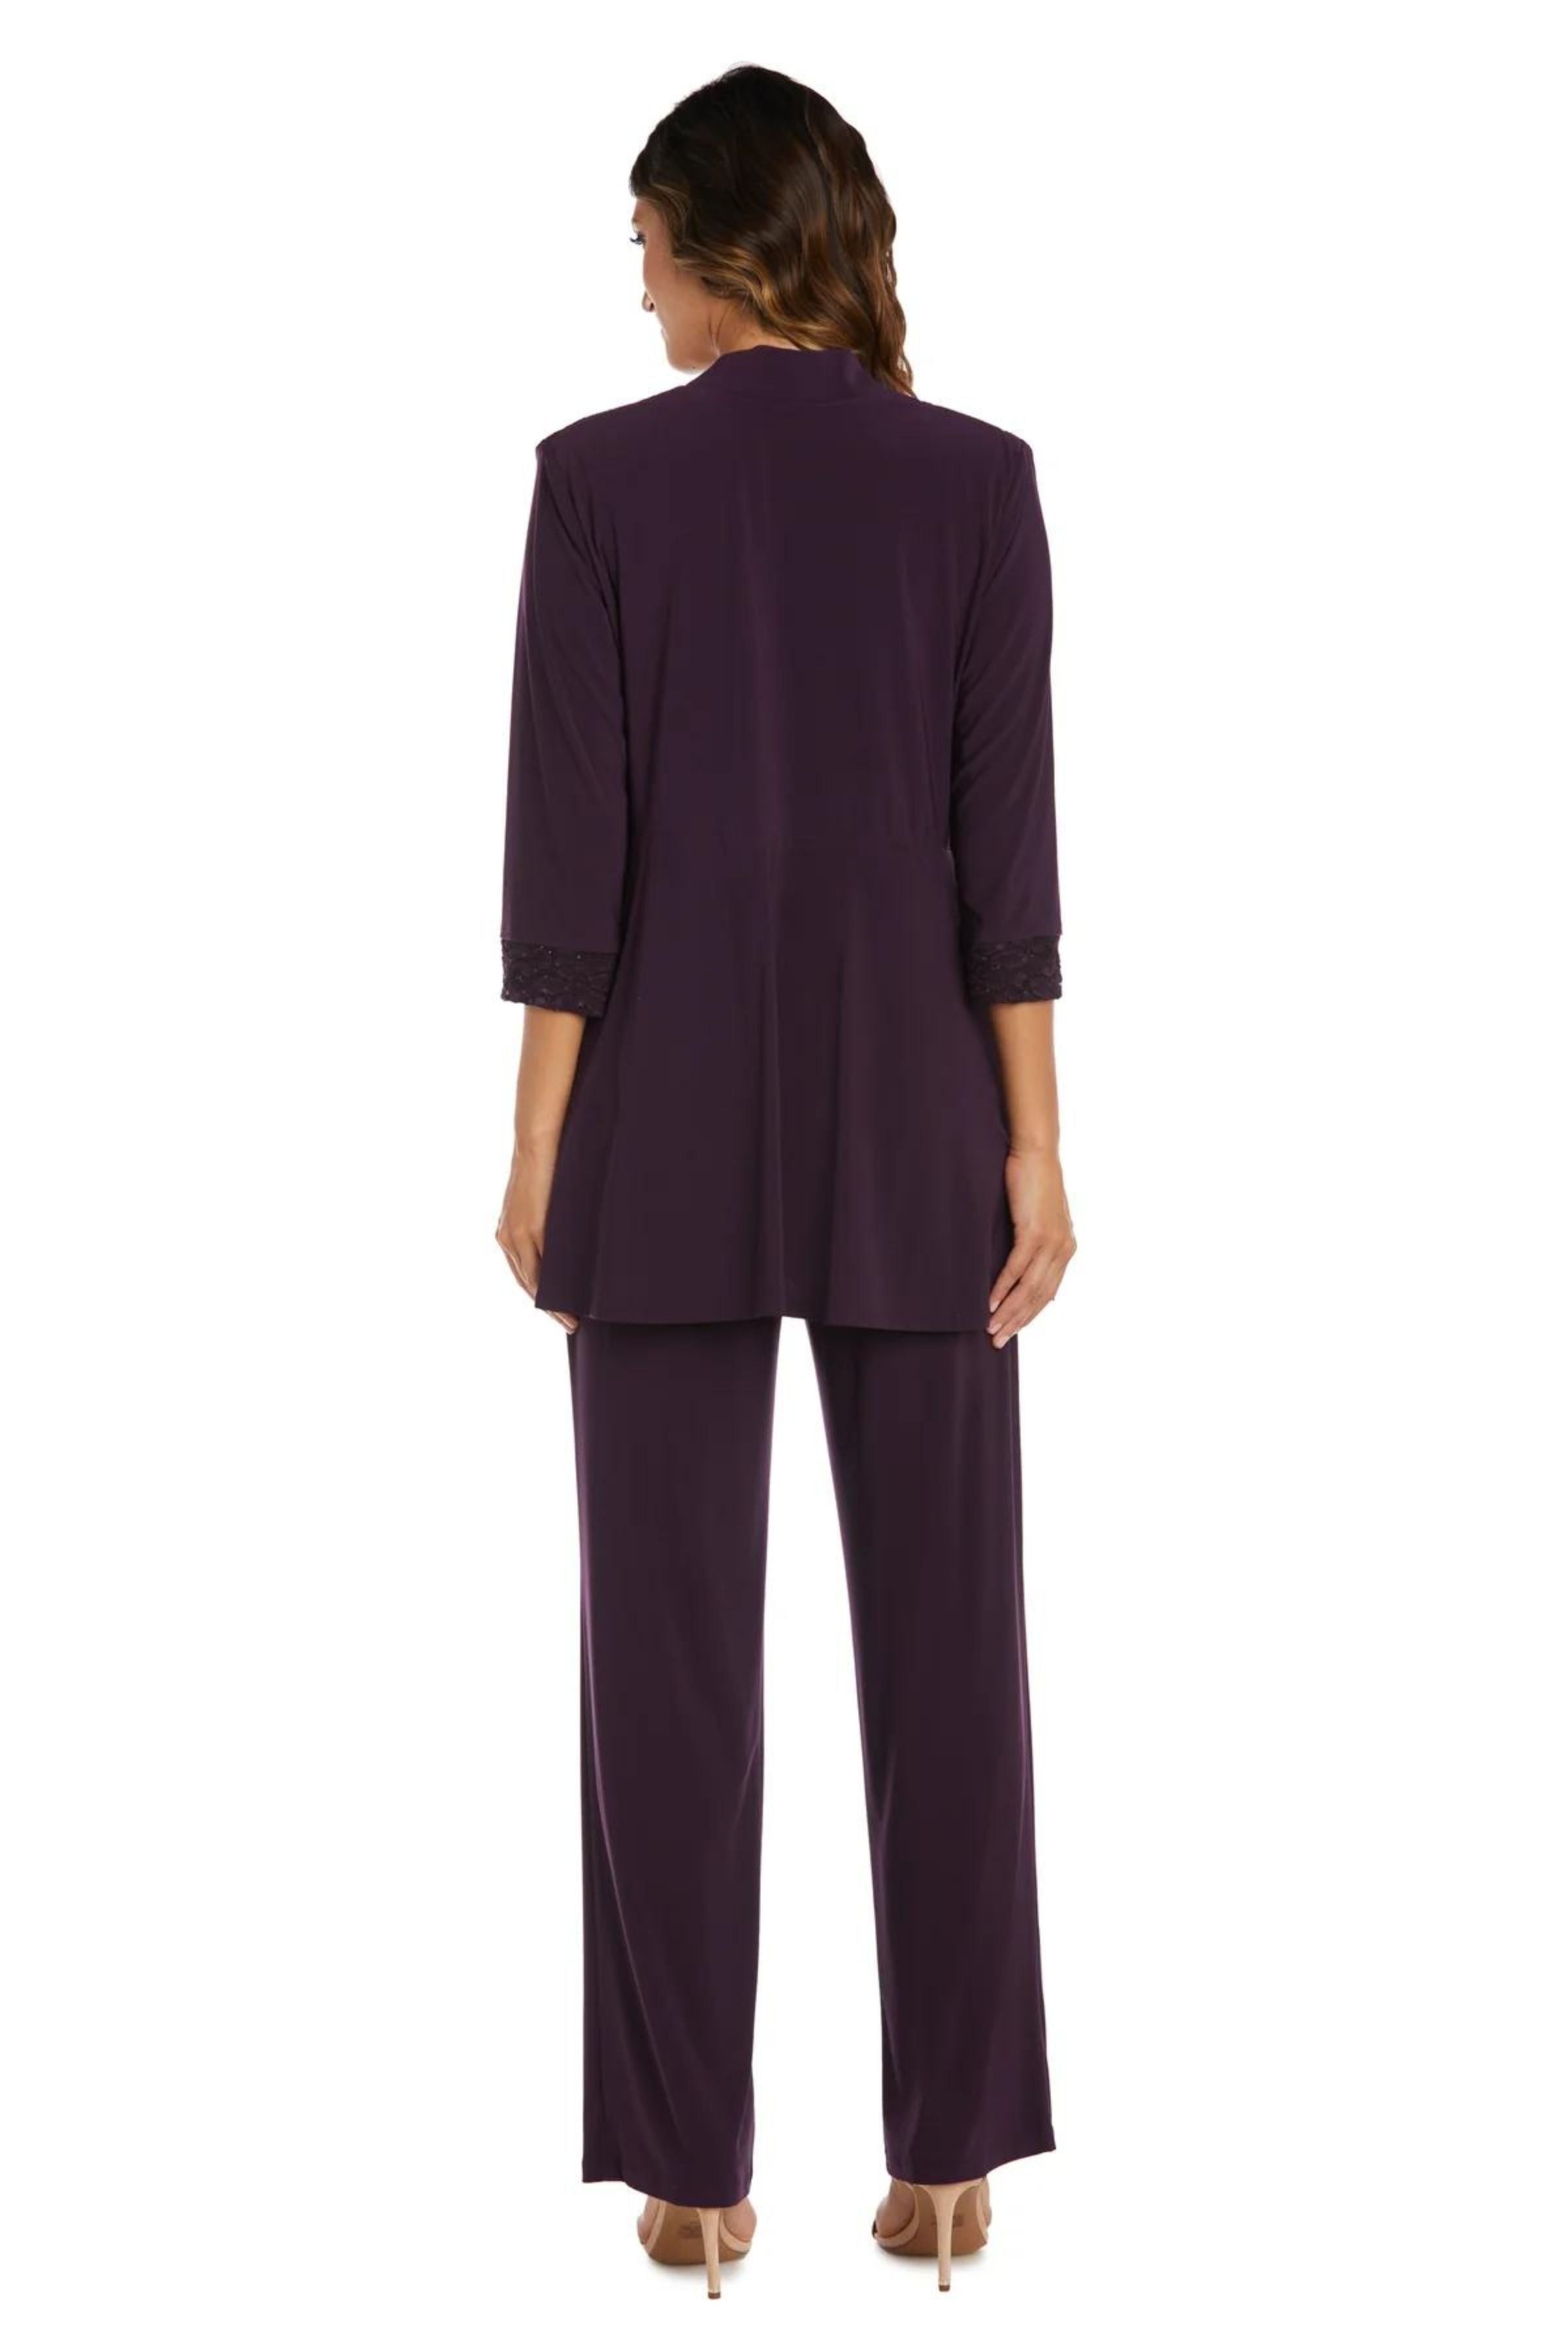 Women's Suits | Theory UK Official Site